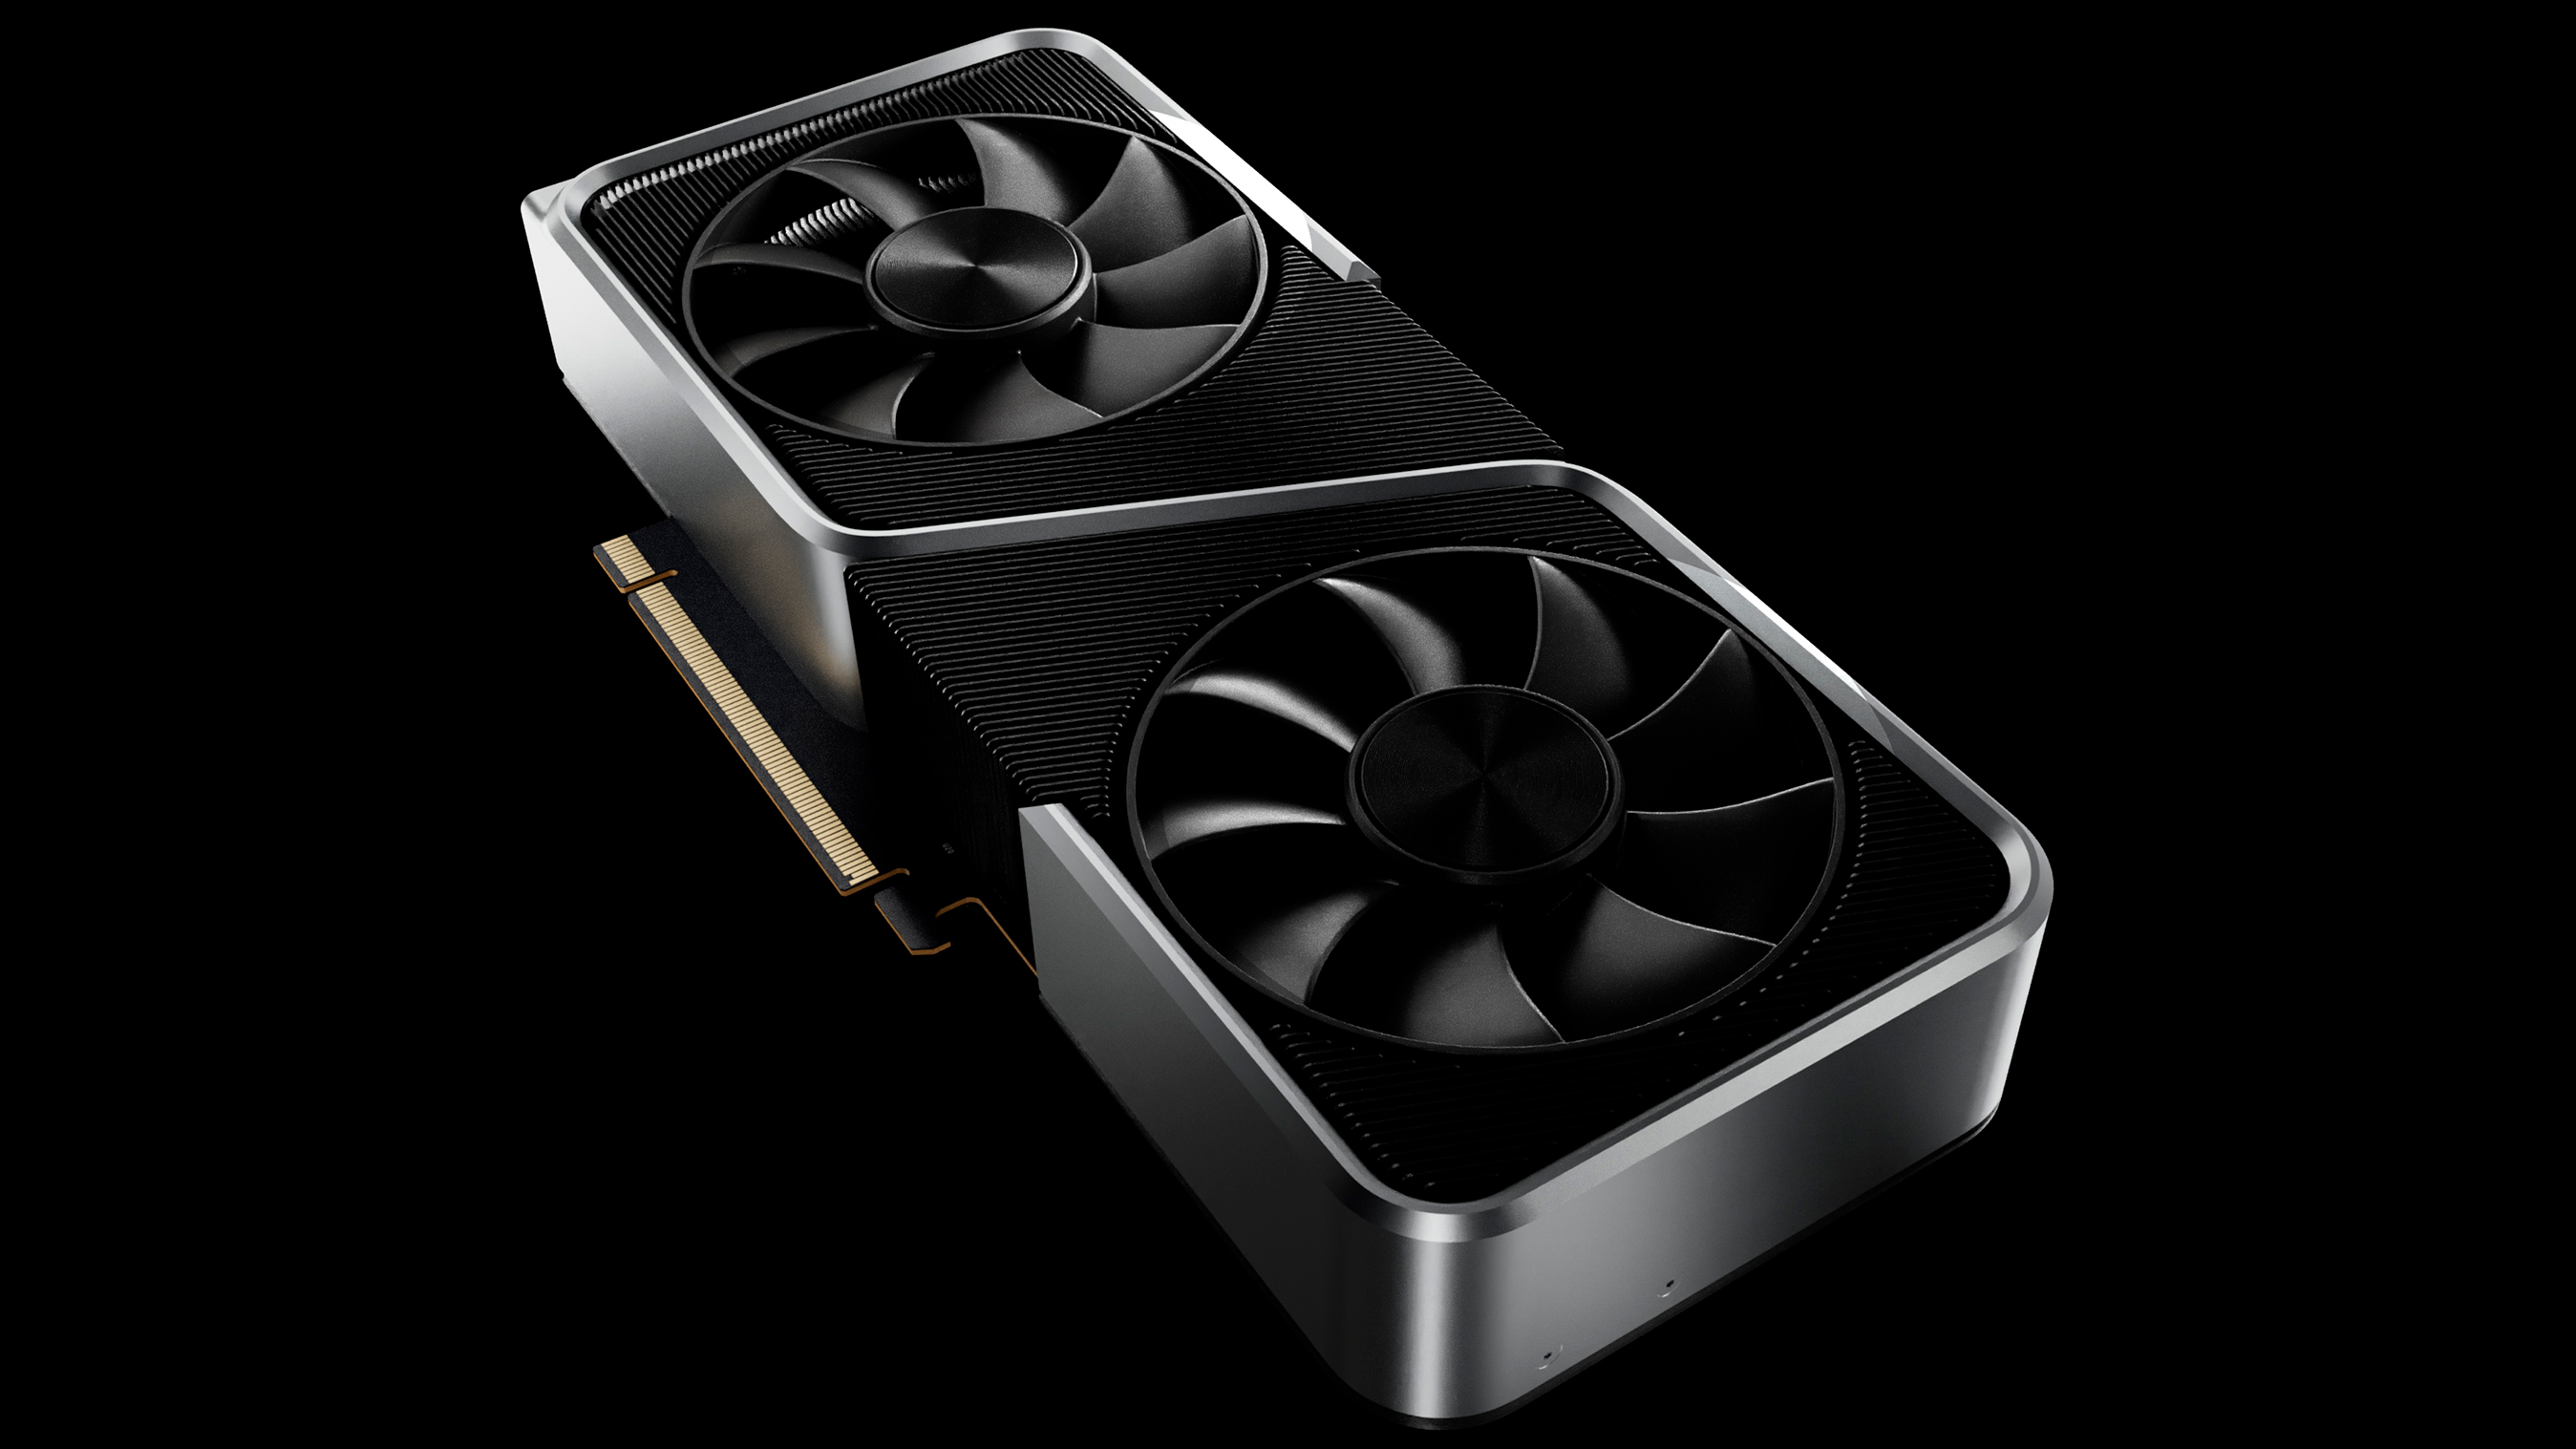 NVIDIA will unveil GeForce RTX 4070 graphics card with 12GB of memory and 200W TGP for gaming computers